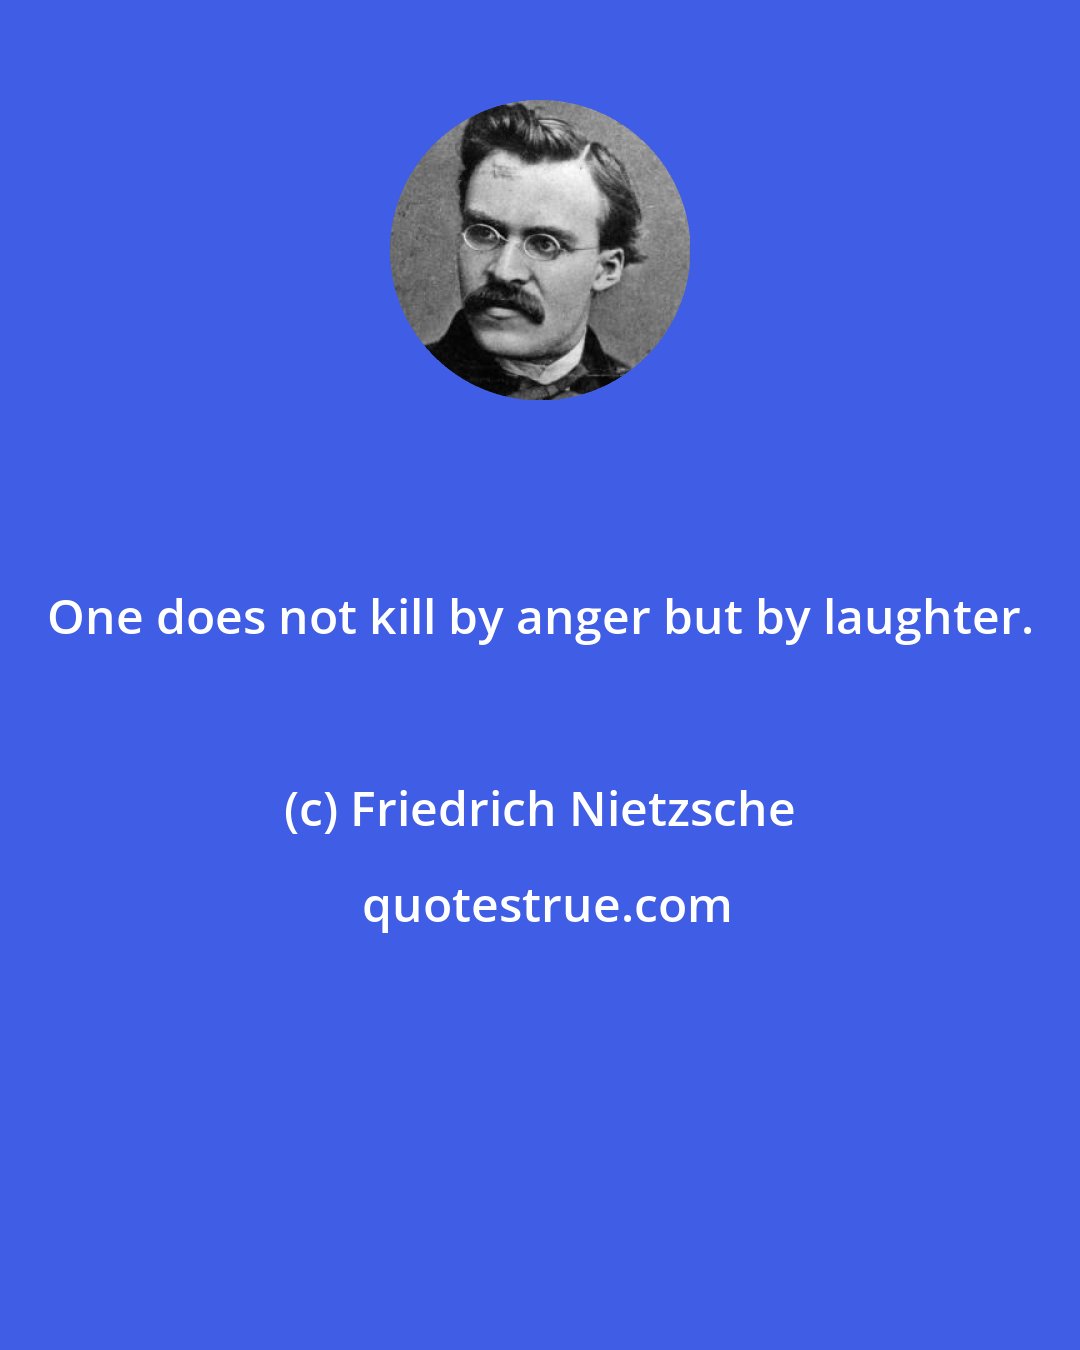 Friedrich Nietzsche: One does not kill by anger but by laughter.